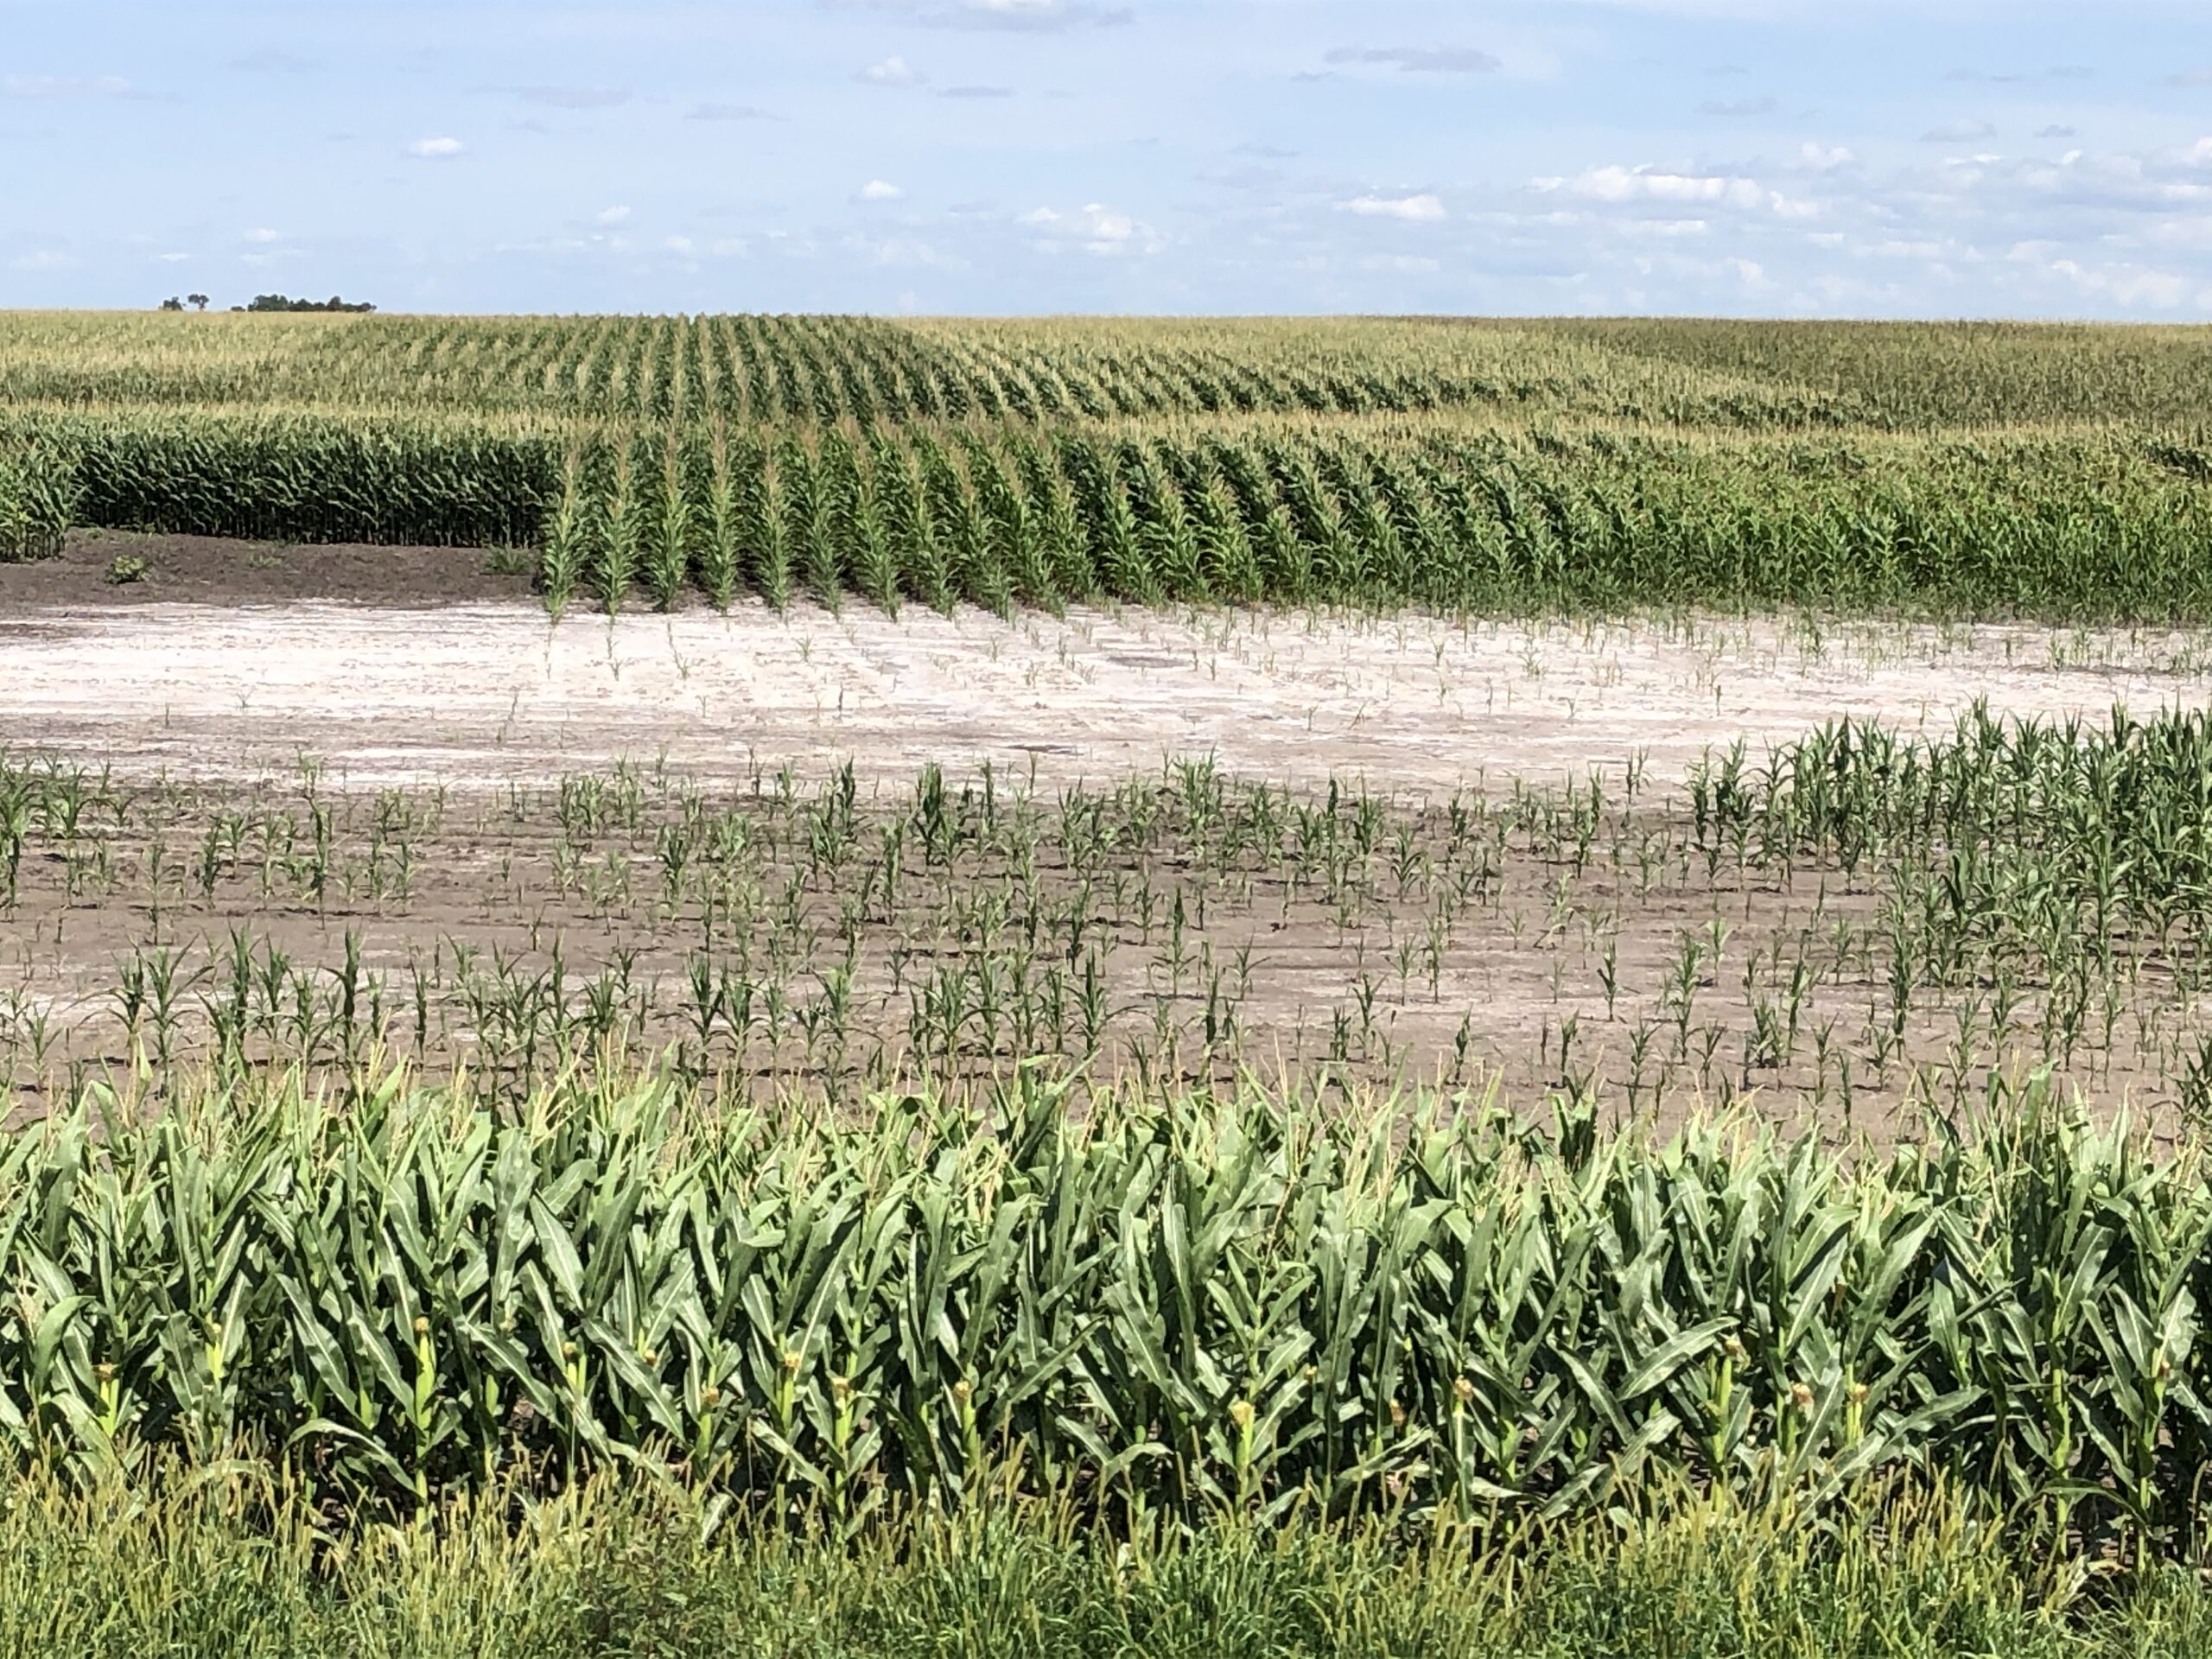 This photo depicts an area of saline soil in a corn field.